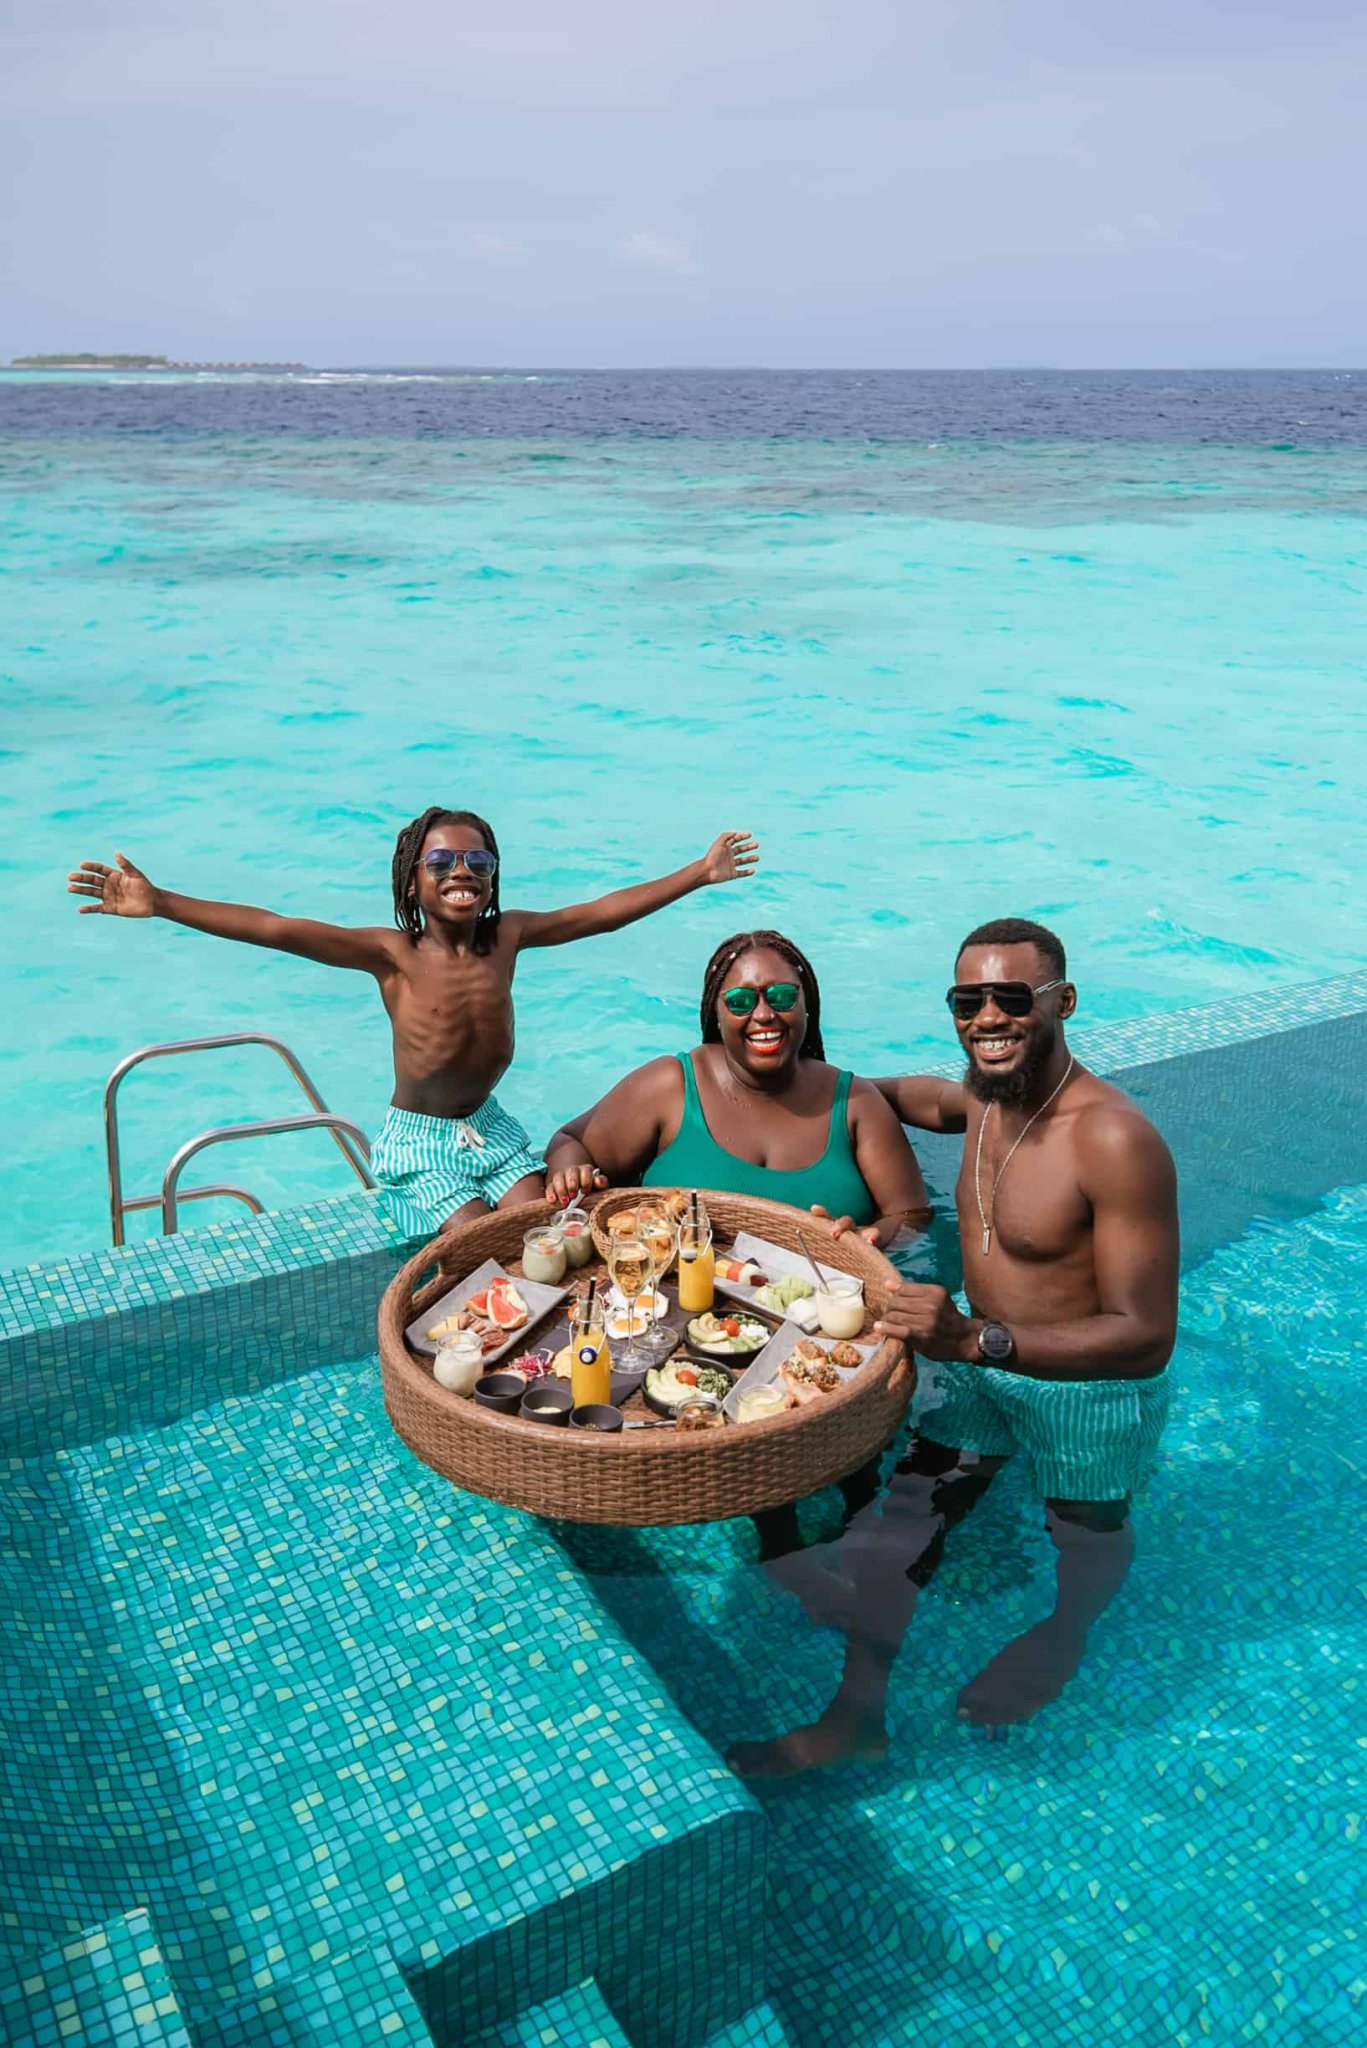 Choosing The Right Room Type For Your Maldives Trip With Kids